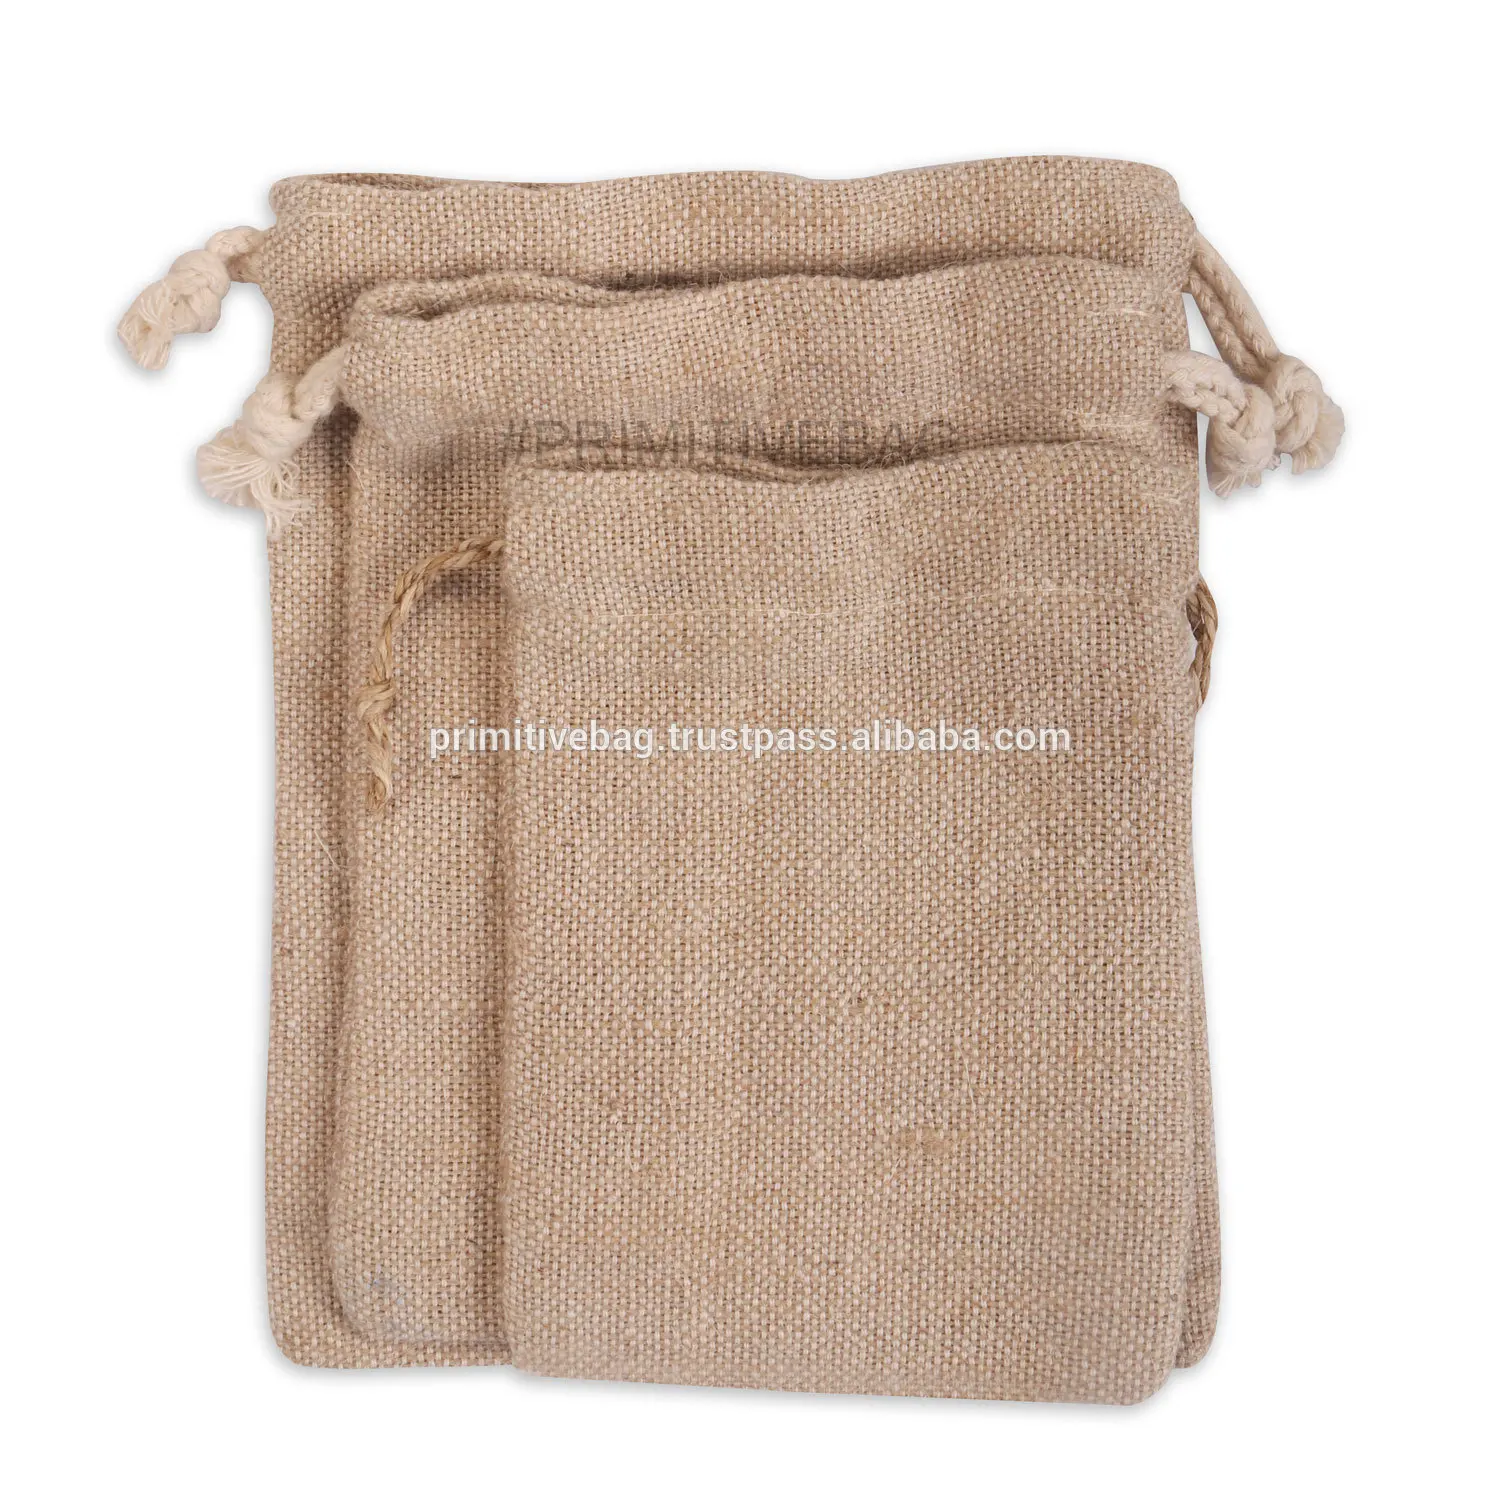 Eco Friendly Wedding Favour Bags Hessian Reusable Handmade In UK With Twine Ties